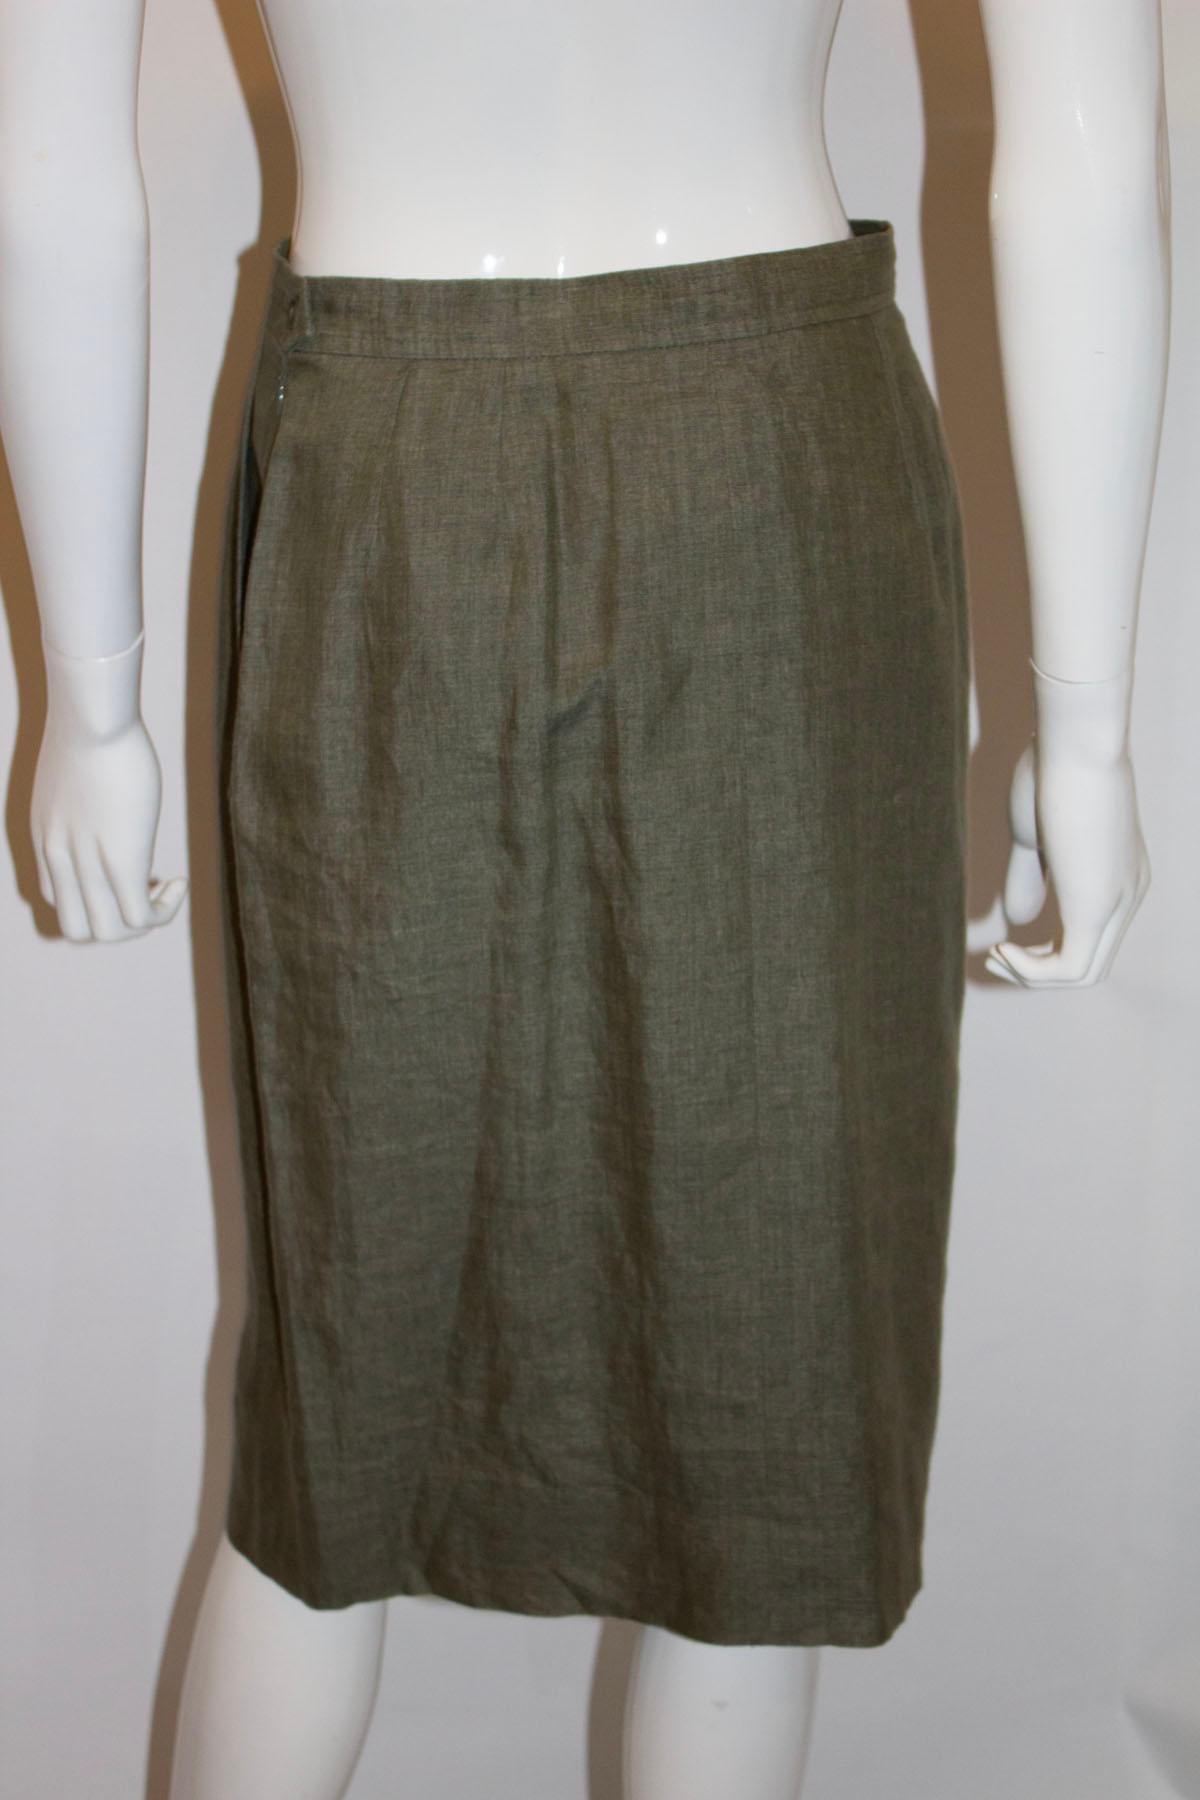 Vintage Yves Saint Laurent Rive Gauche Sage Green Linen Skirt In Good Condition For Sale In London, GB